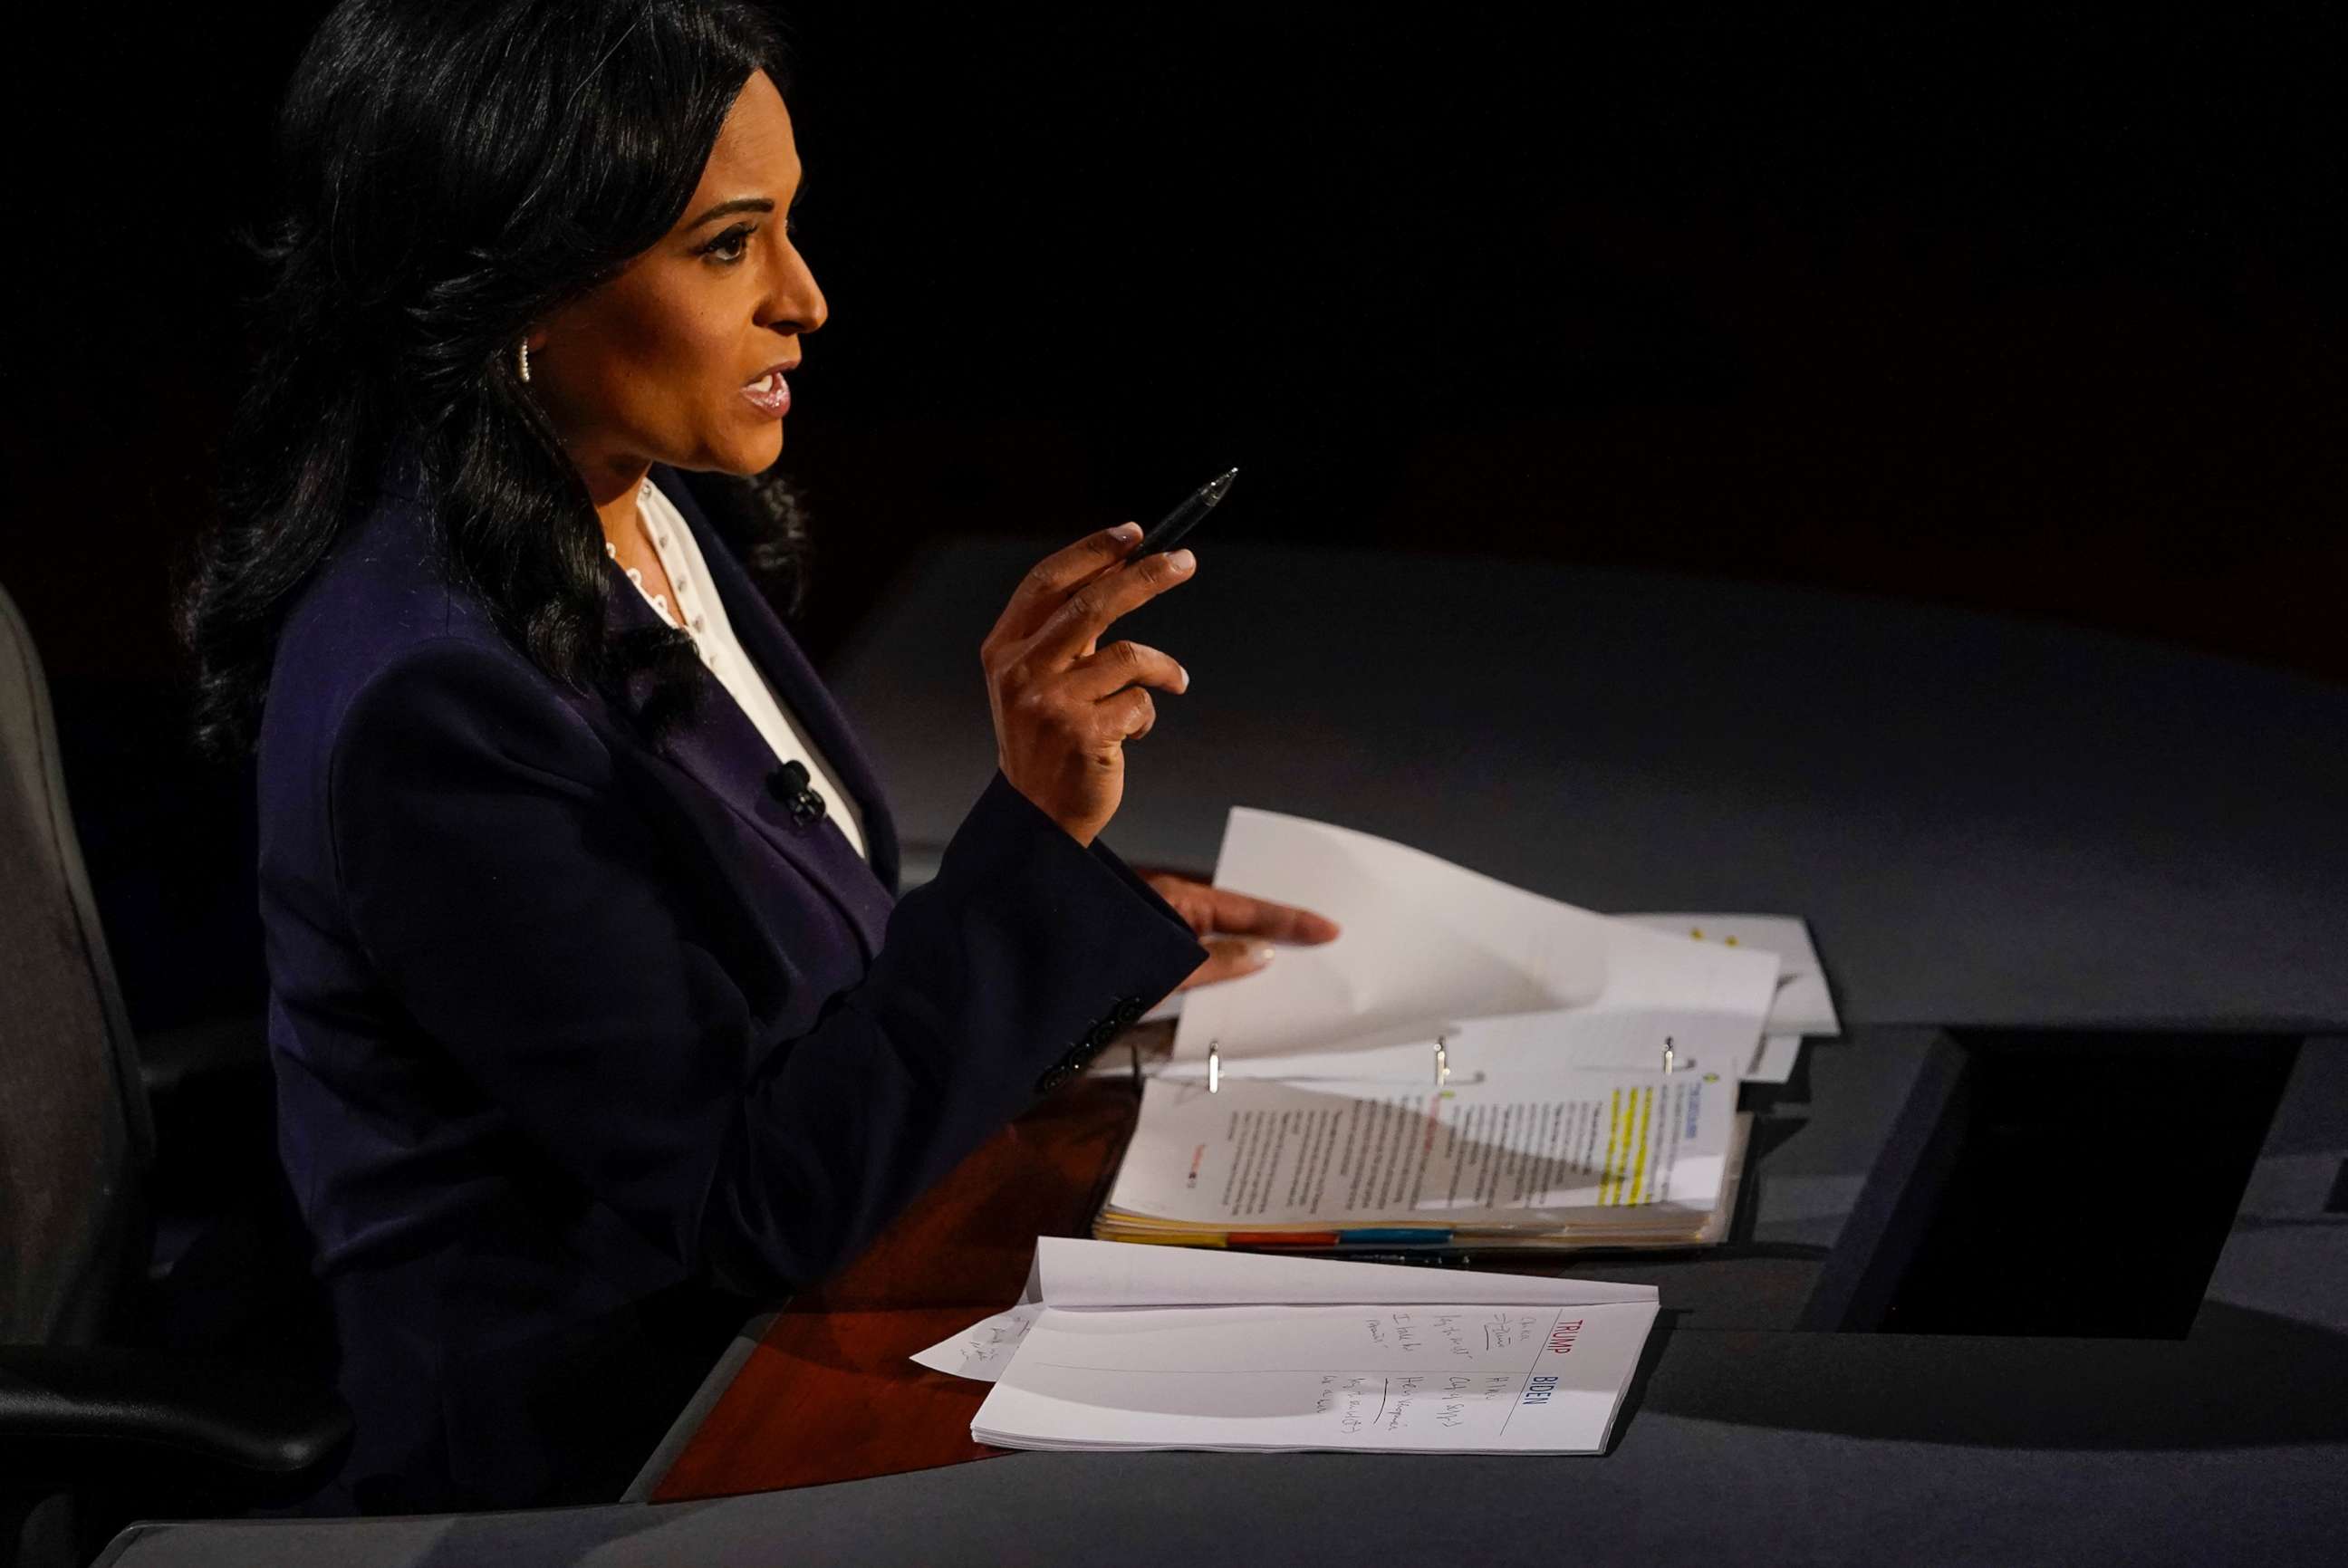 PHOTO: Moderator Kristen Welker of NBC News asks a question during the second and final presidential debate at the Curb Event Center at Belmont University in Nashville, Tenn., Oct. 22, 2020.